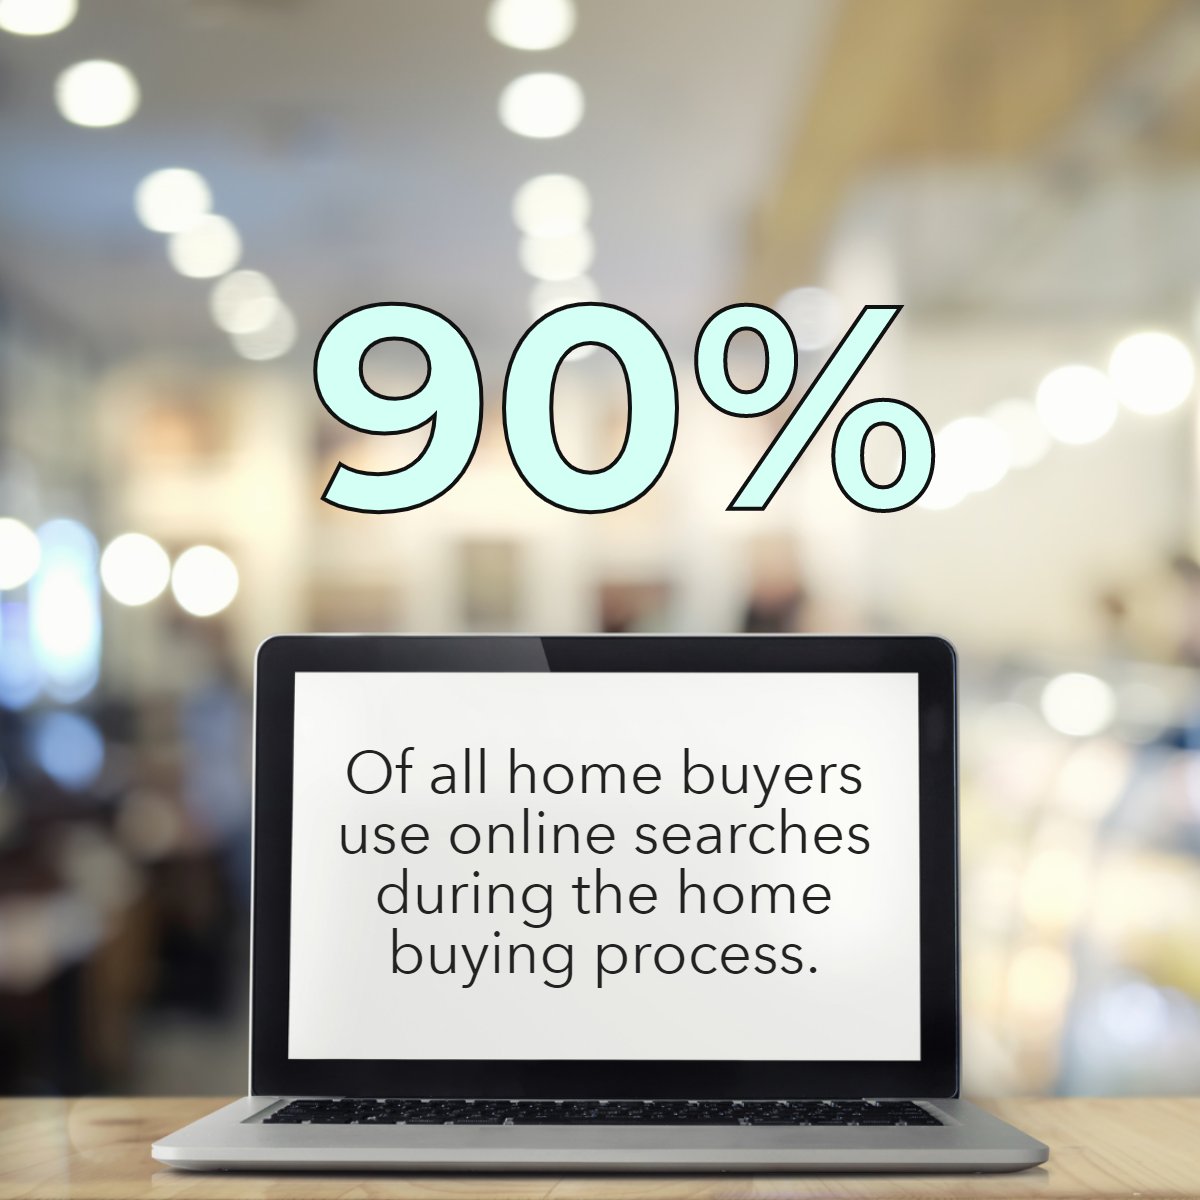 Interesting fact of the day. 🤔

#online    #homebuyers    #process    #searches
#realtynewengland #mannymenezesgroup #realtyne #wesellnewengland #welovenewengland #ilovenewengland #massrealestate #rirealestate #nhrealestate #ctrealestate #wesellhomes #vtrealestate